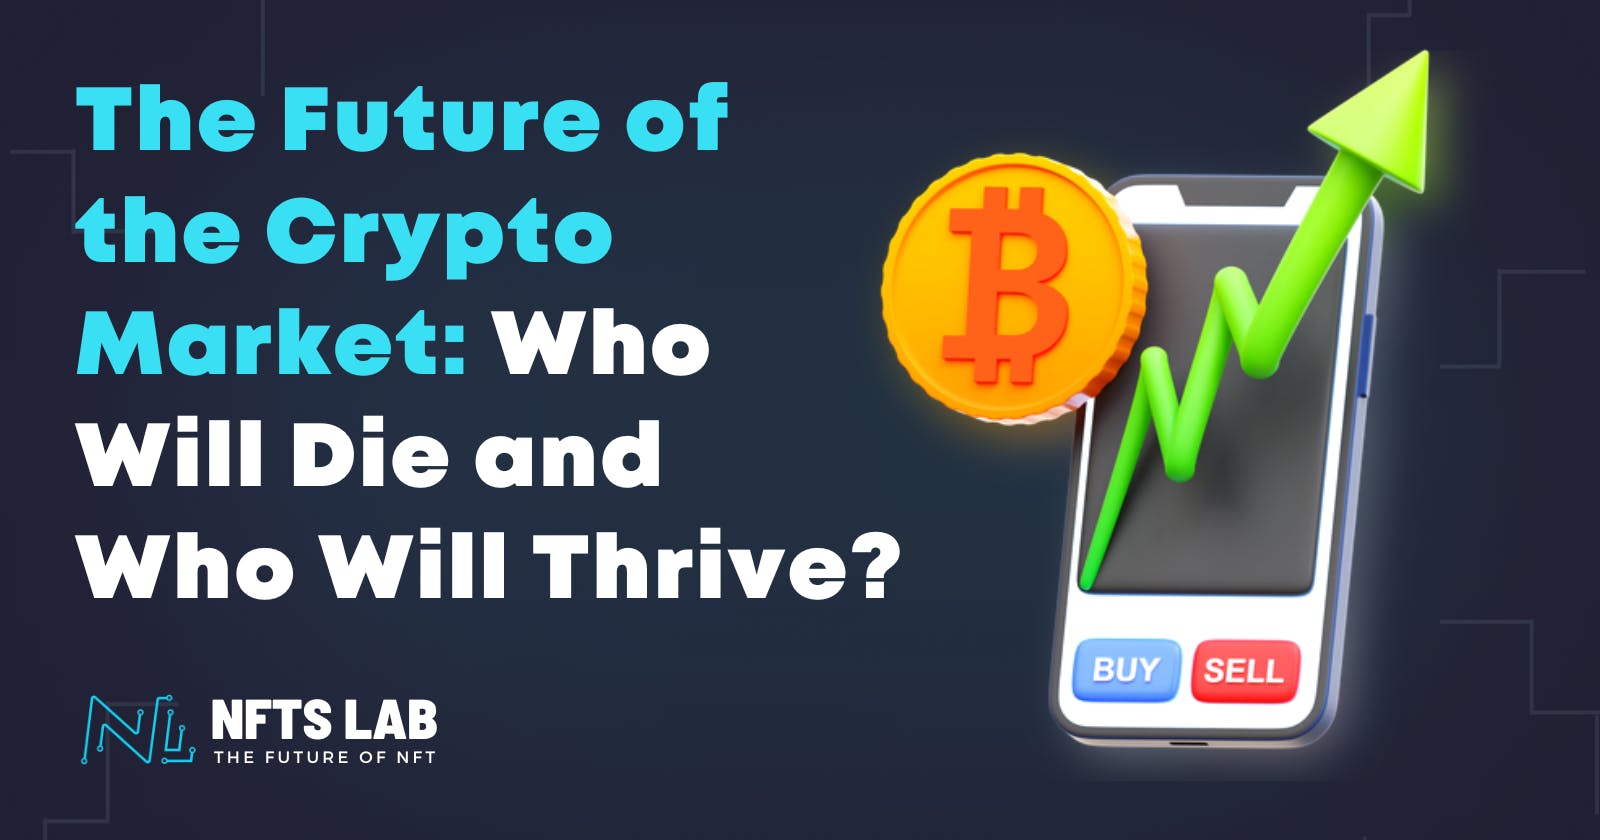 The Future of the Crypto Market: Who Will Die and Who Will Thrive?